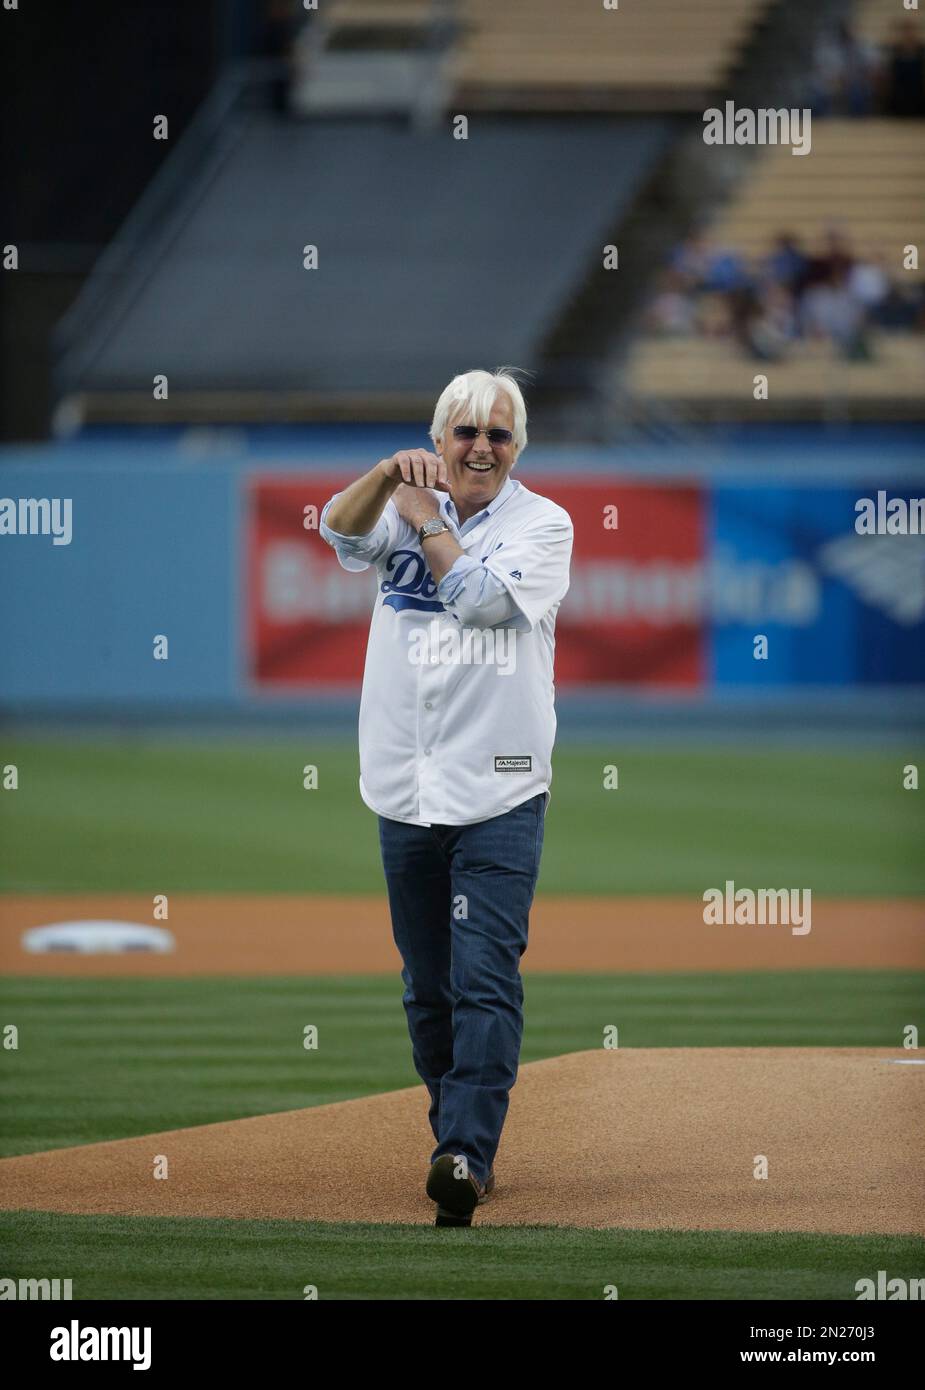 WATCH: Hall of Fame trainer Bob Baffert delivers first pitch before Mets  vs. Orioles game – Saratogian